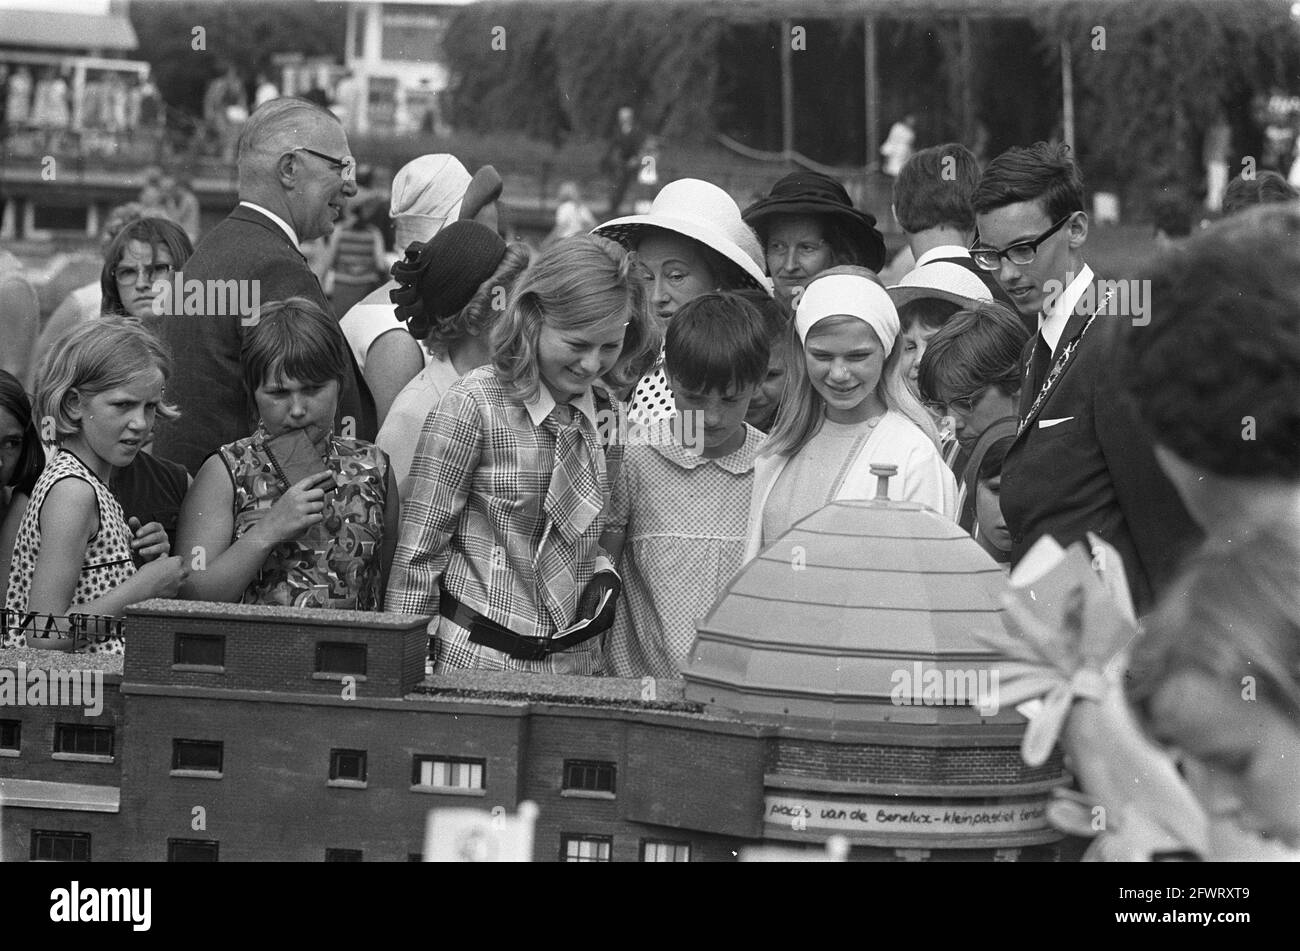 Princess Marie Astrid of Luxembourg opened Benelux exhibition at Madurodam. The Princess and of The Hague youth during a visit to Madurodam, June 14, 1968, Youth, visits, princesses, The Netherlands, 20th century press agency photo, news to remember, documentary, historic photography 1945-1990, visual stories, human history of the Twentieth Century, capturing moments in time Stock Photo